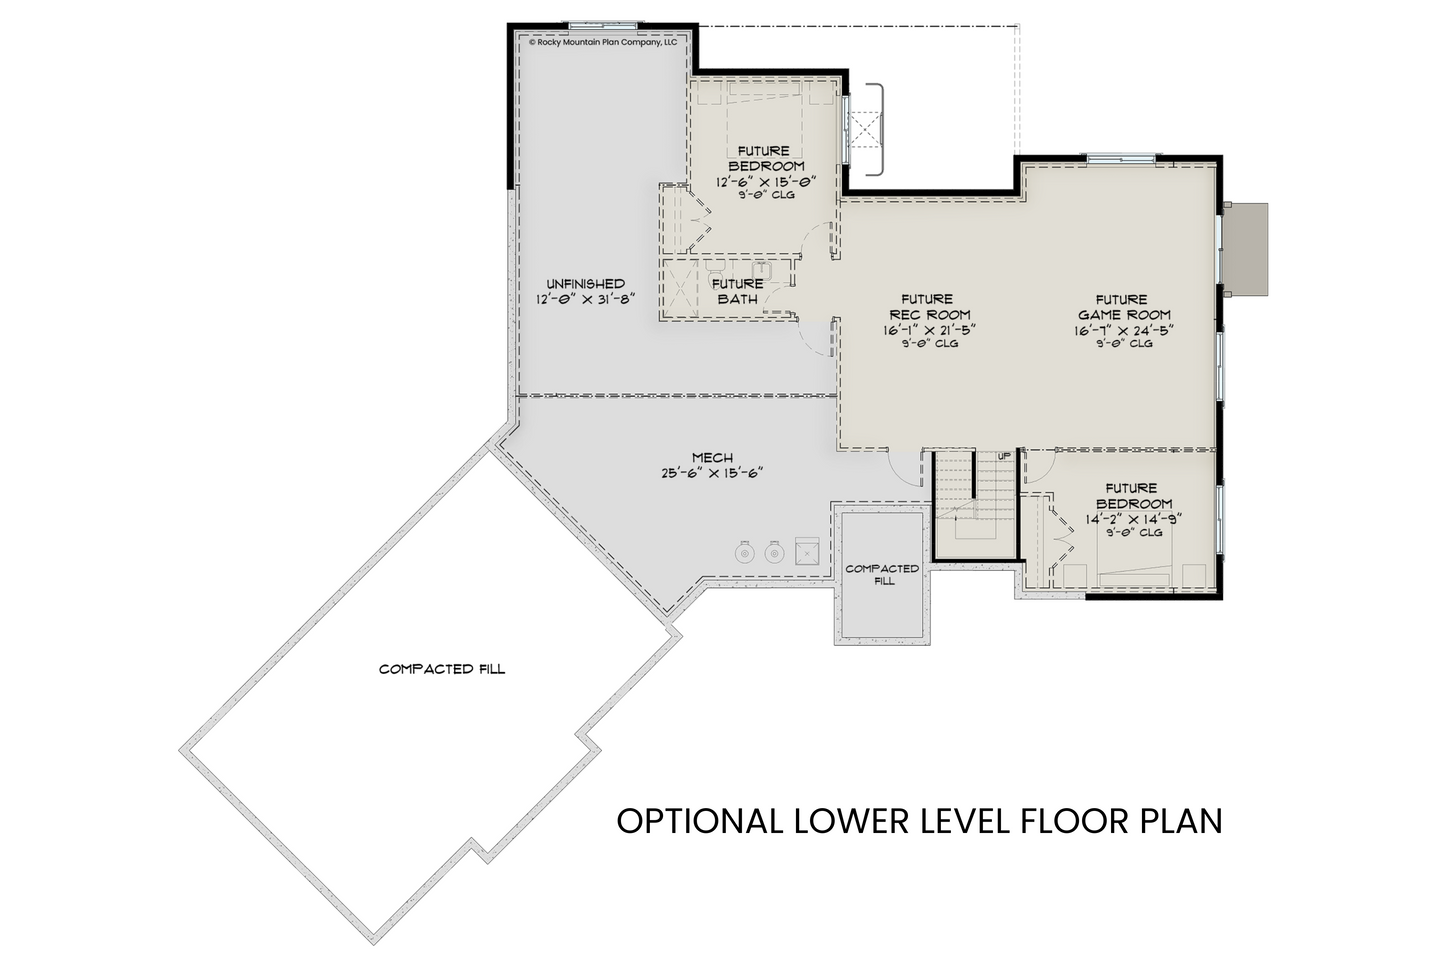 Three-Bedroom-Open-Floor-Plan-with-Lower-Level-Expansion-Lower-Level-Floor-Plan-Rocky-Mountain-Plan-Company-Dudley-Lake